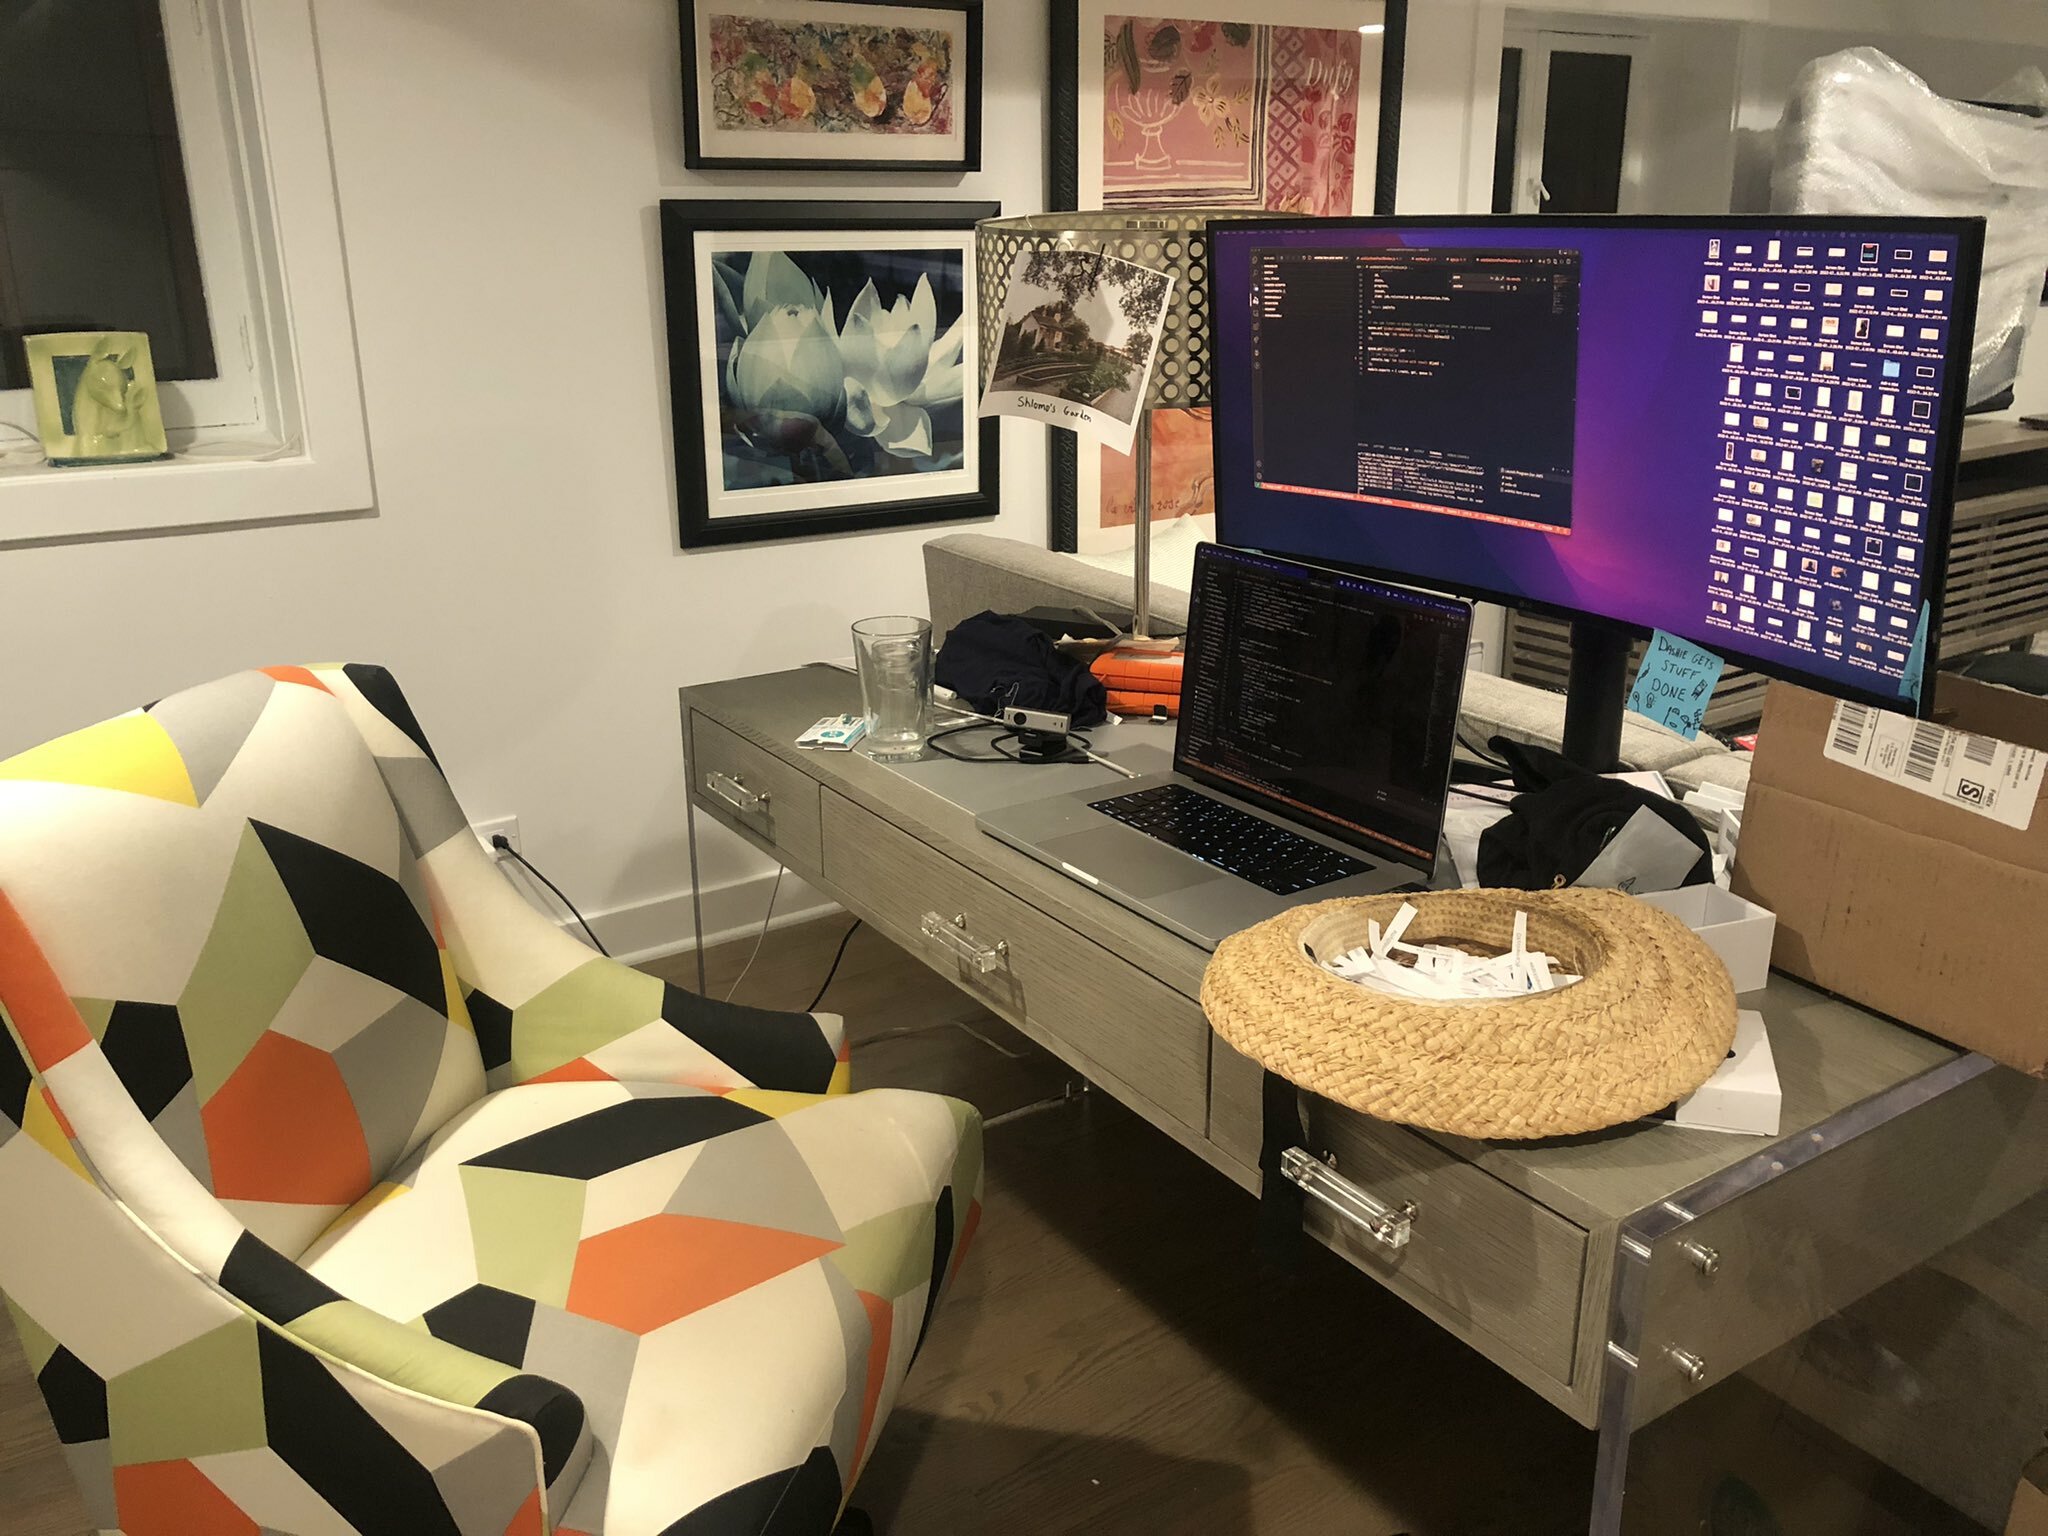 Picture of a desk and a chair from 45 degrees angle